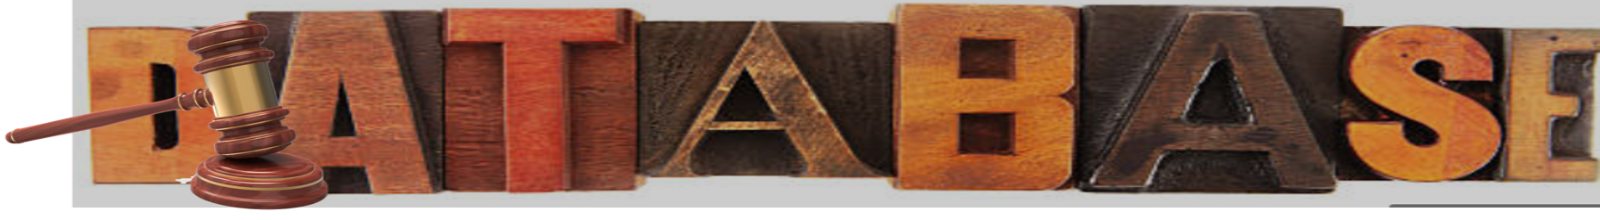 The words database in wooden block letters with a law gavel in the forefront